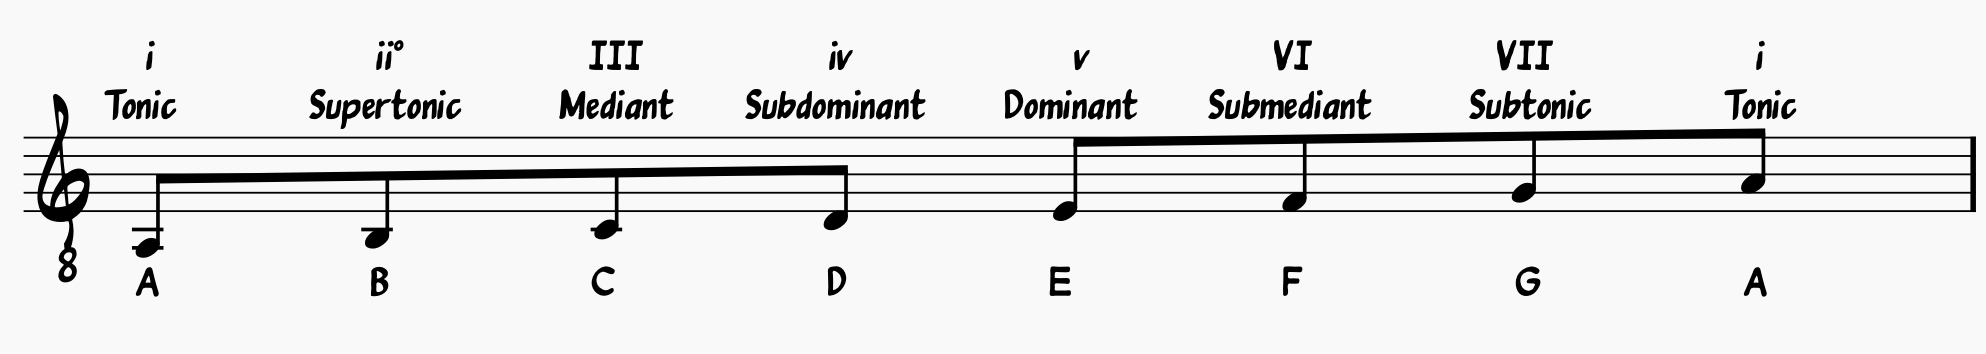 A Minor with Scale Degrees and Numerals Labeled